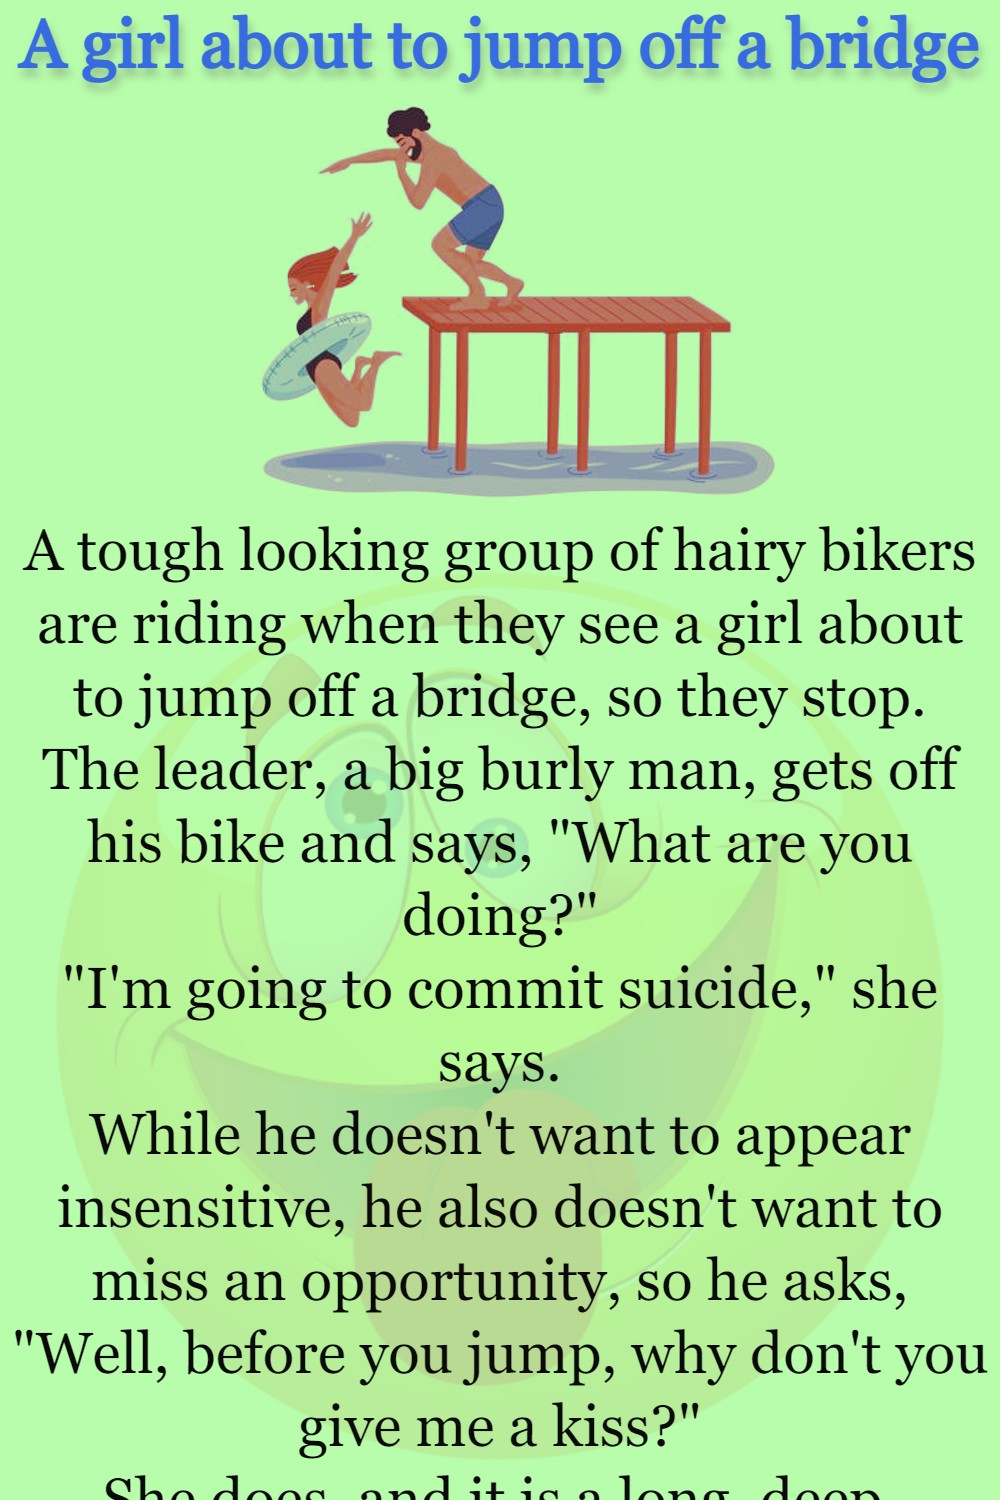 A girl about to jump off a bridge